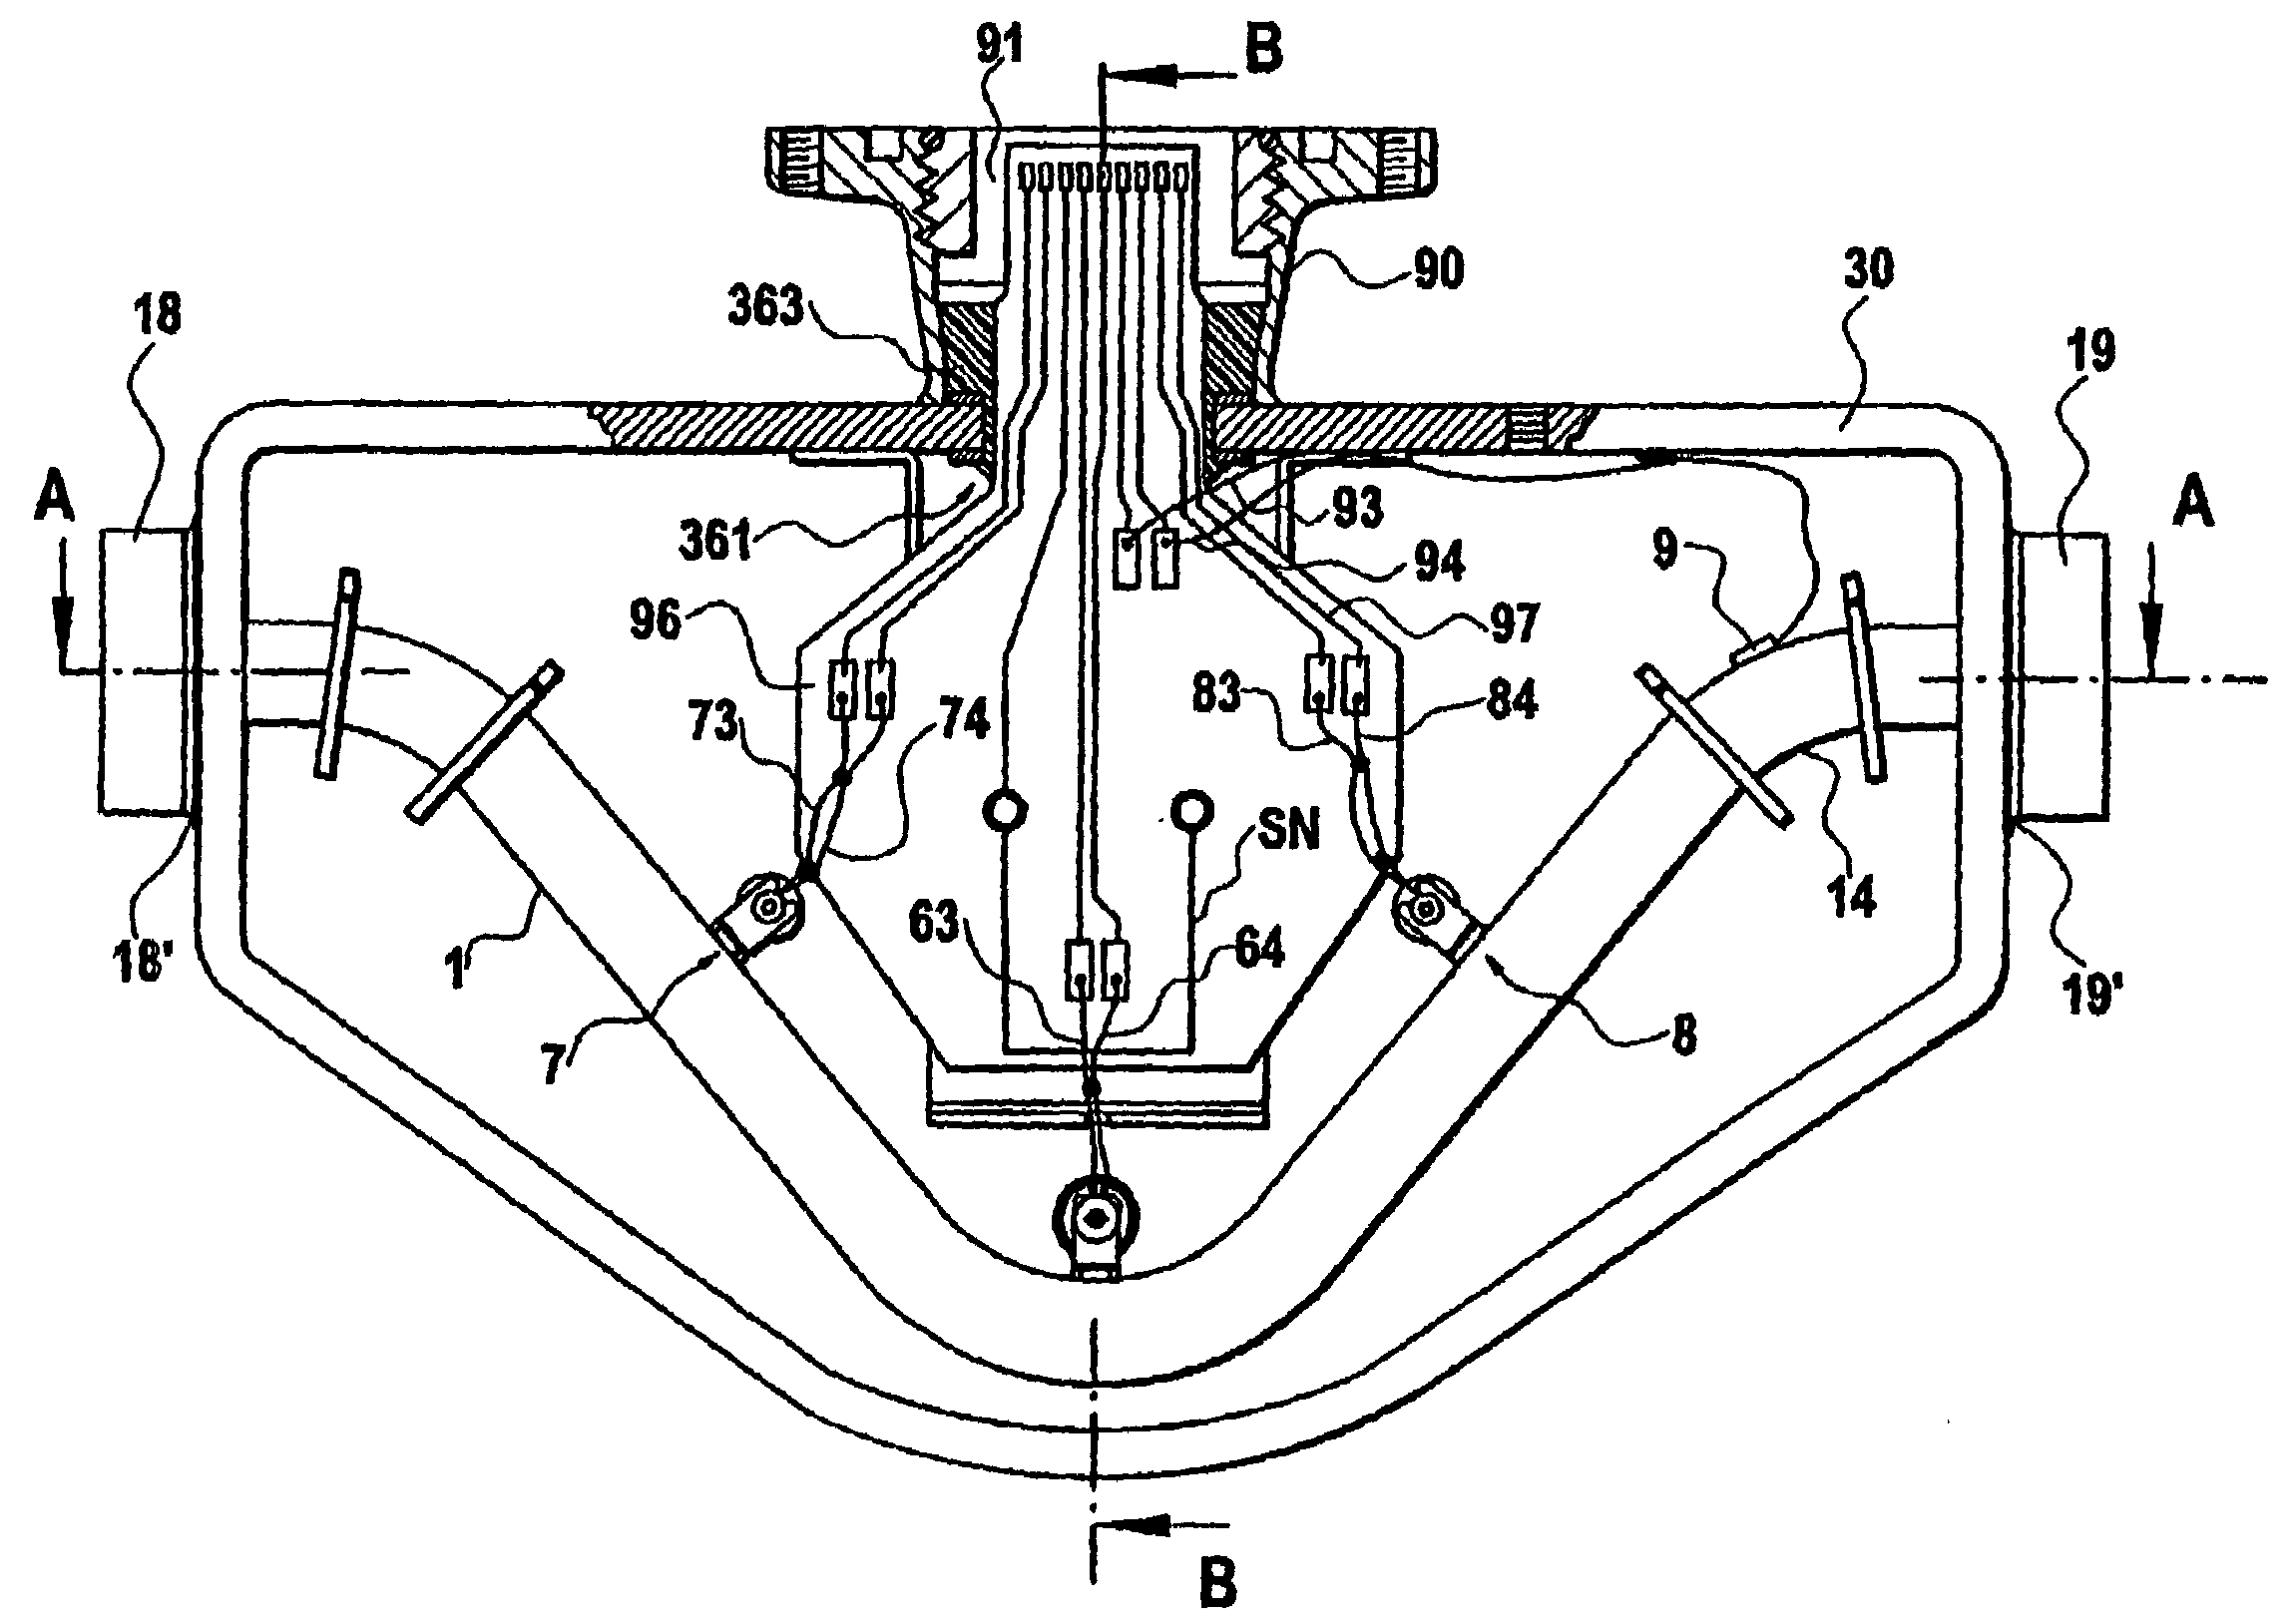 Method for adjusting a mechanical natural frequency